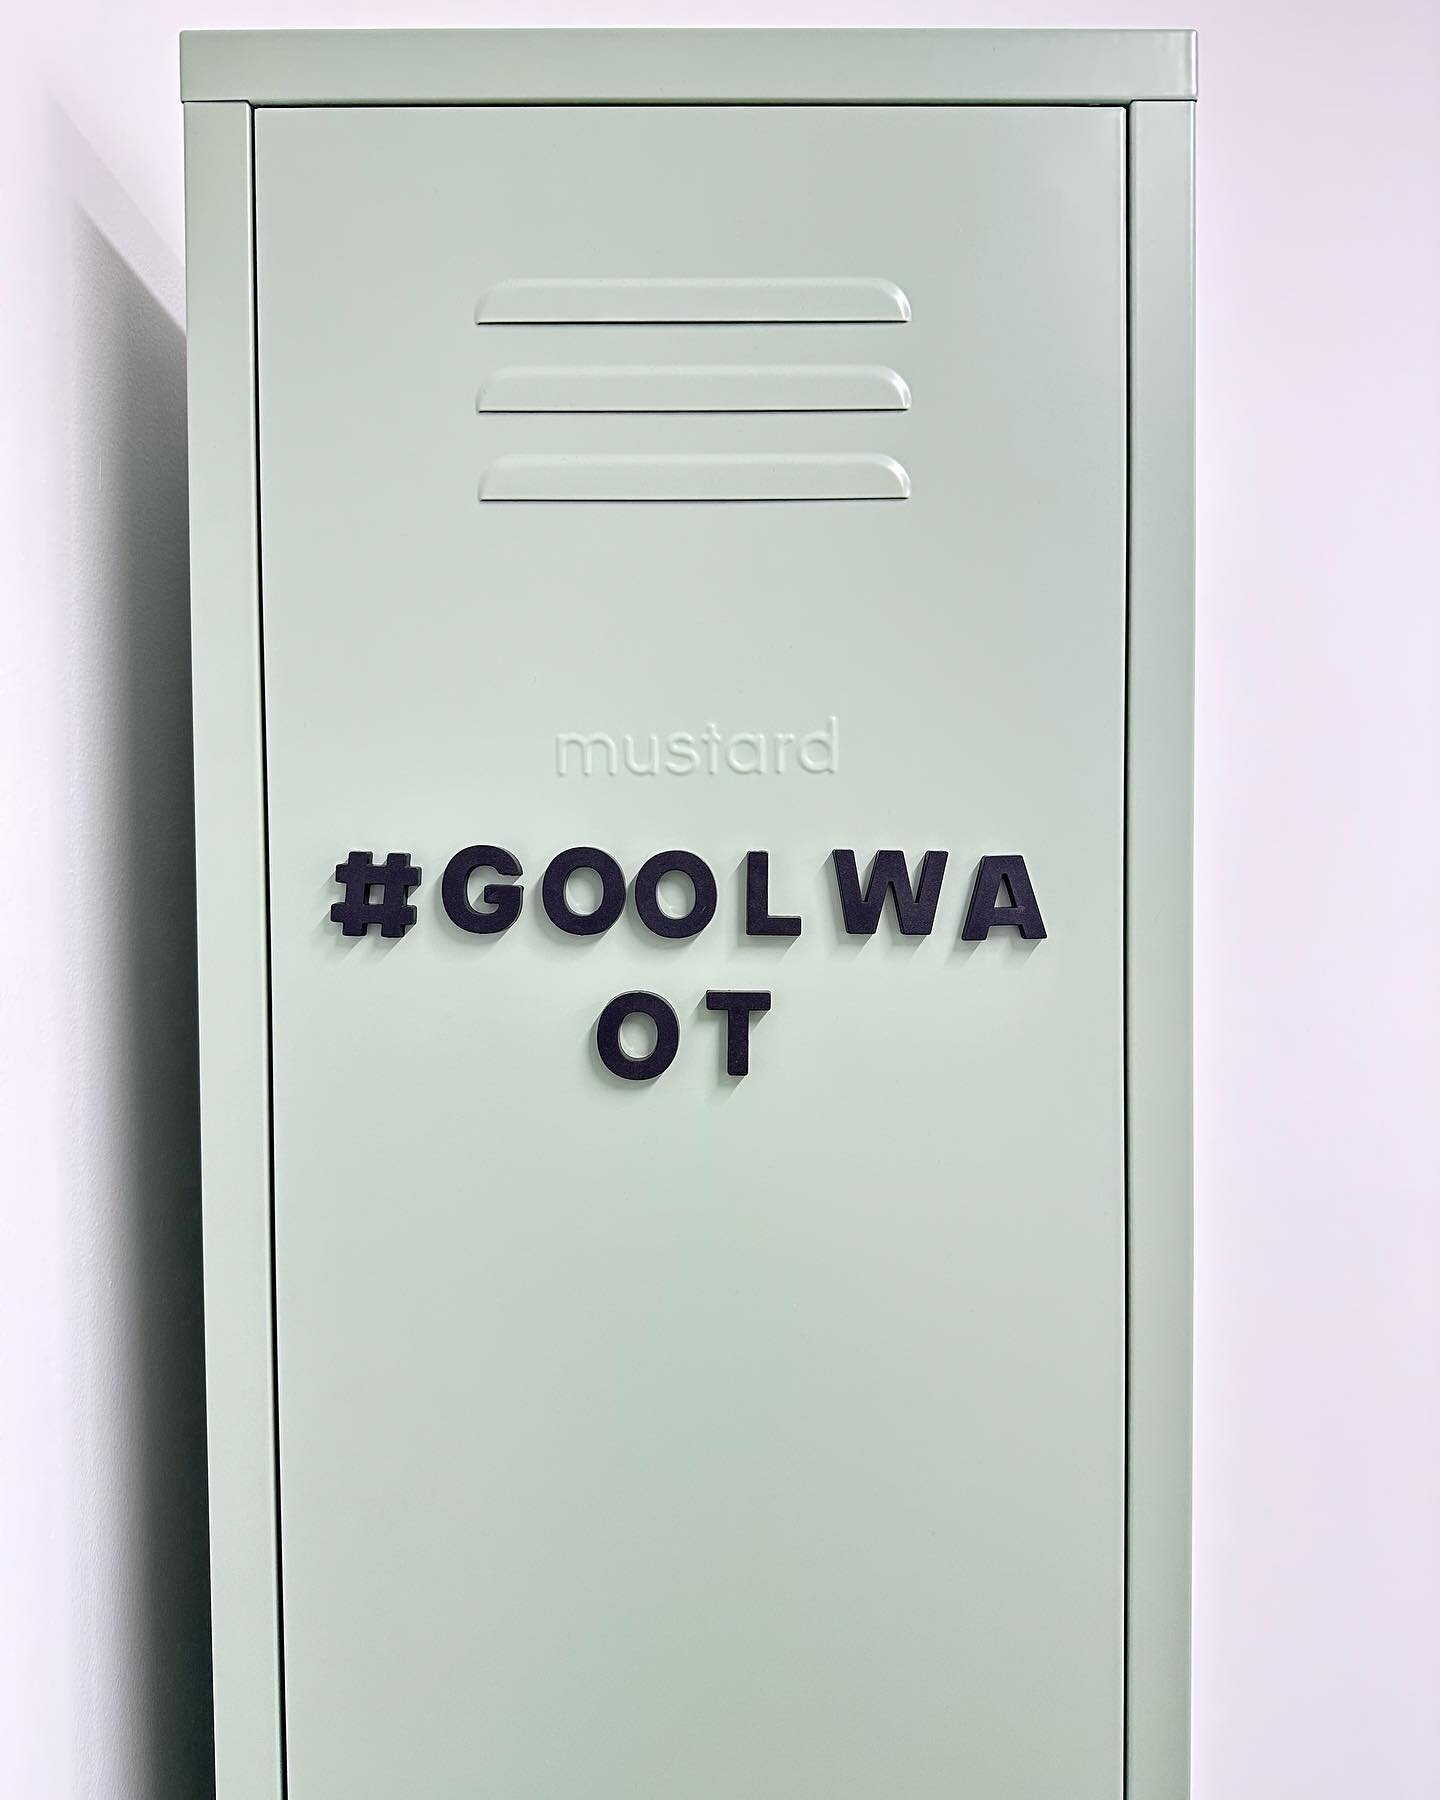 ⭐️ GOOLWA OT UPDATE ⭐️

Goolwa Occupational Therapy services are currently on hold and therefore we are not currently taking on referrals. 

Goolwa Occupational Therapy is currently hiring an Adult Occupational Therapist and a Paediatric Occupational